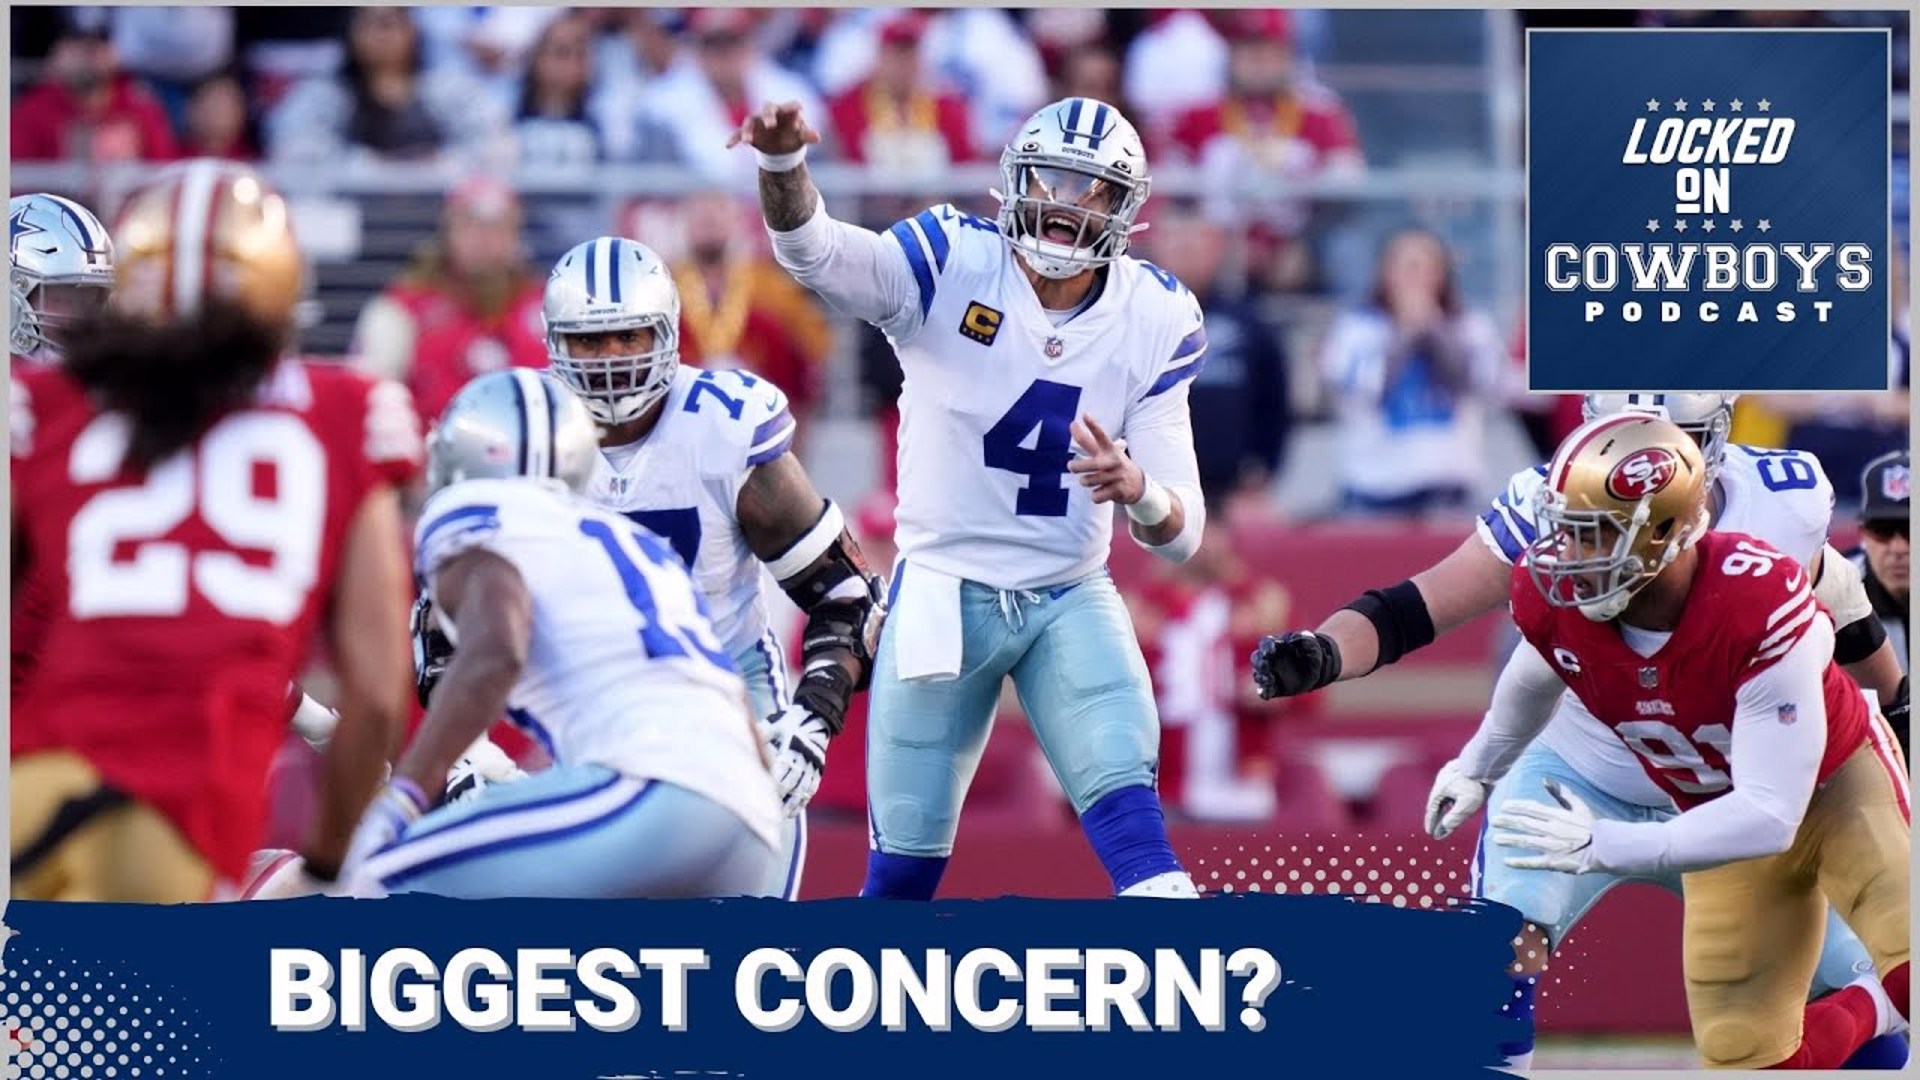 Marcus Mosher and Landon McCool talk the Cowboys' loss to the 49ers, what the team needs on offense and who on defense played well against San Francisco. Plus more!